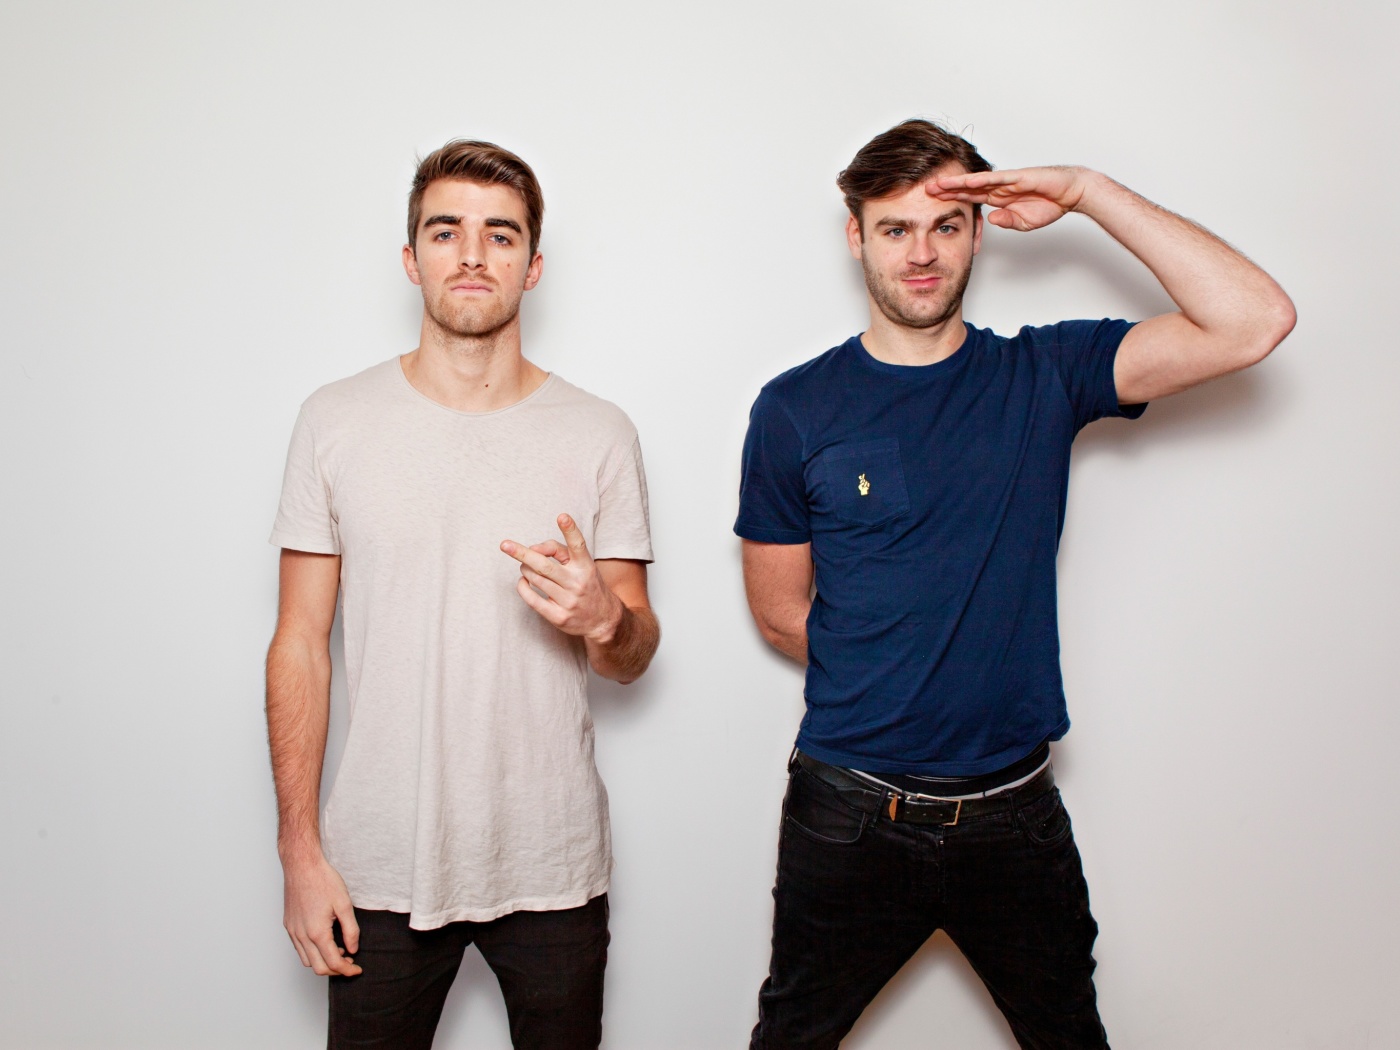 The Chainsmokers with Andrew Taggart and Alex Pall wallpaper 1400x1050